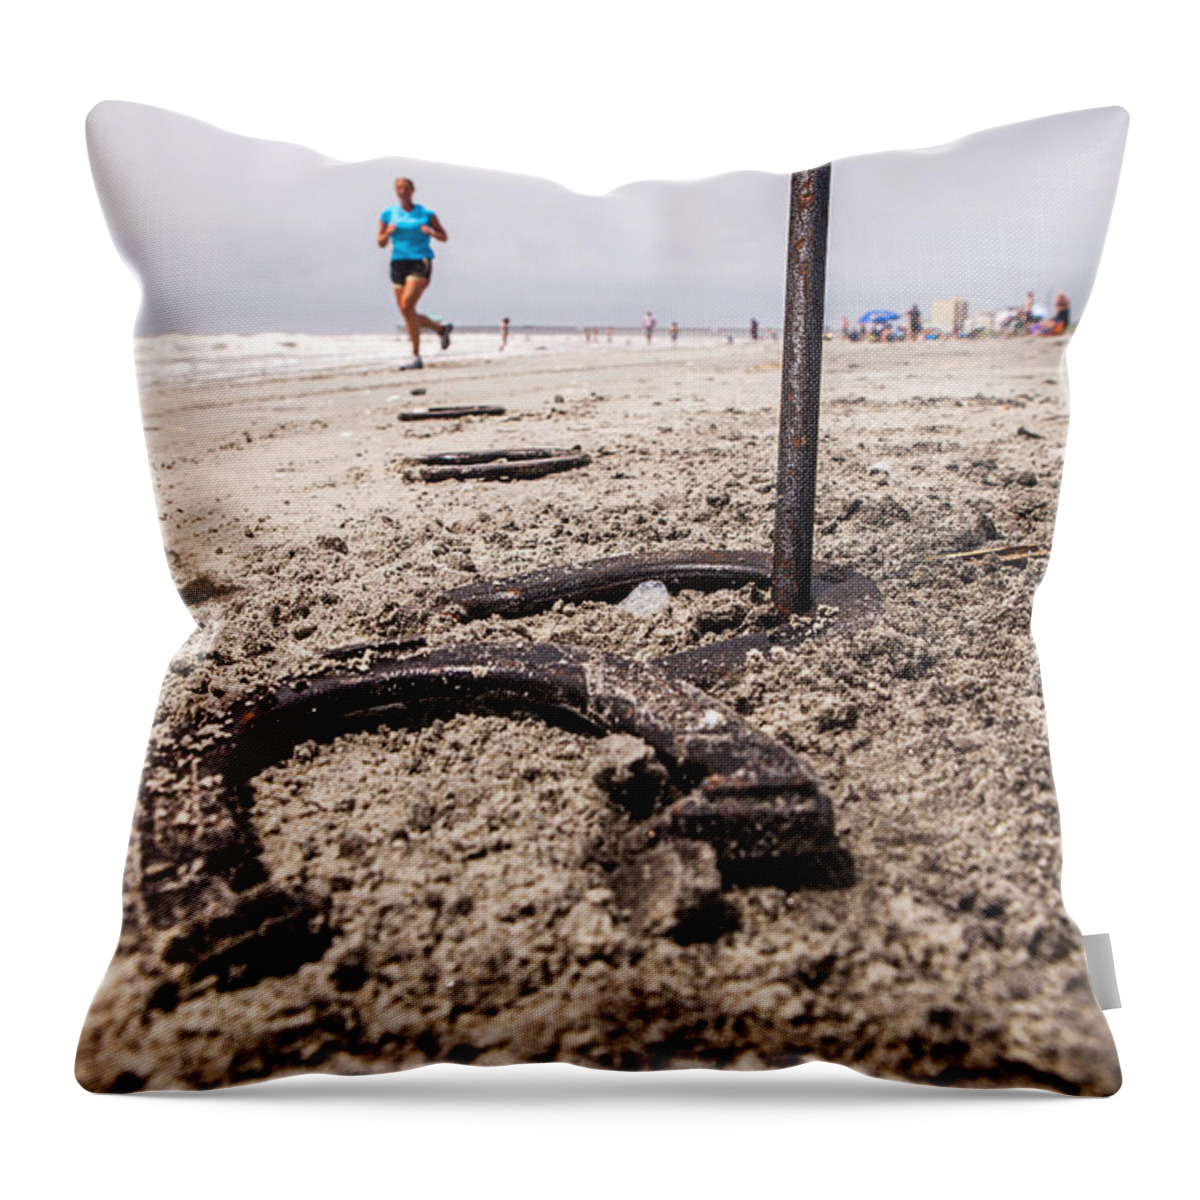 Ringer Throw Pillow featuring the photograph Ringer by Sennie Pierson